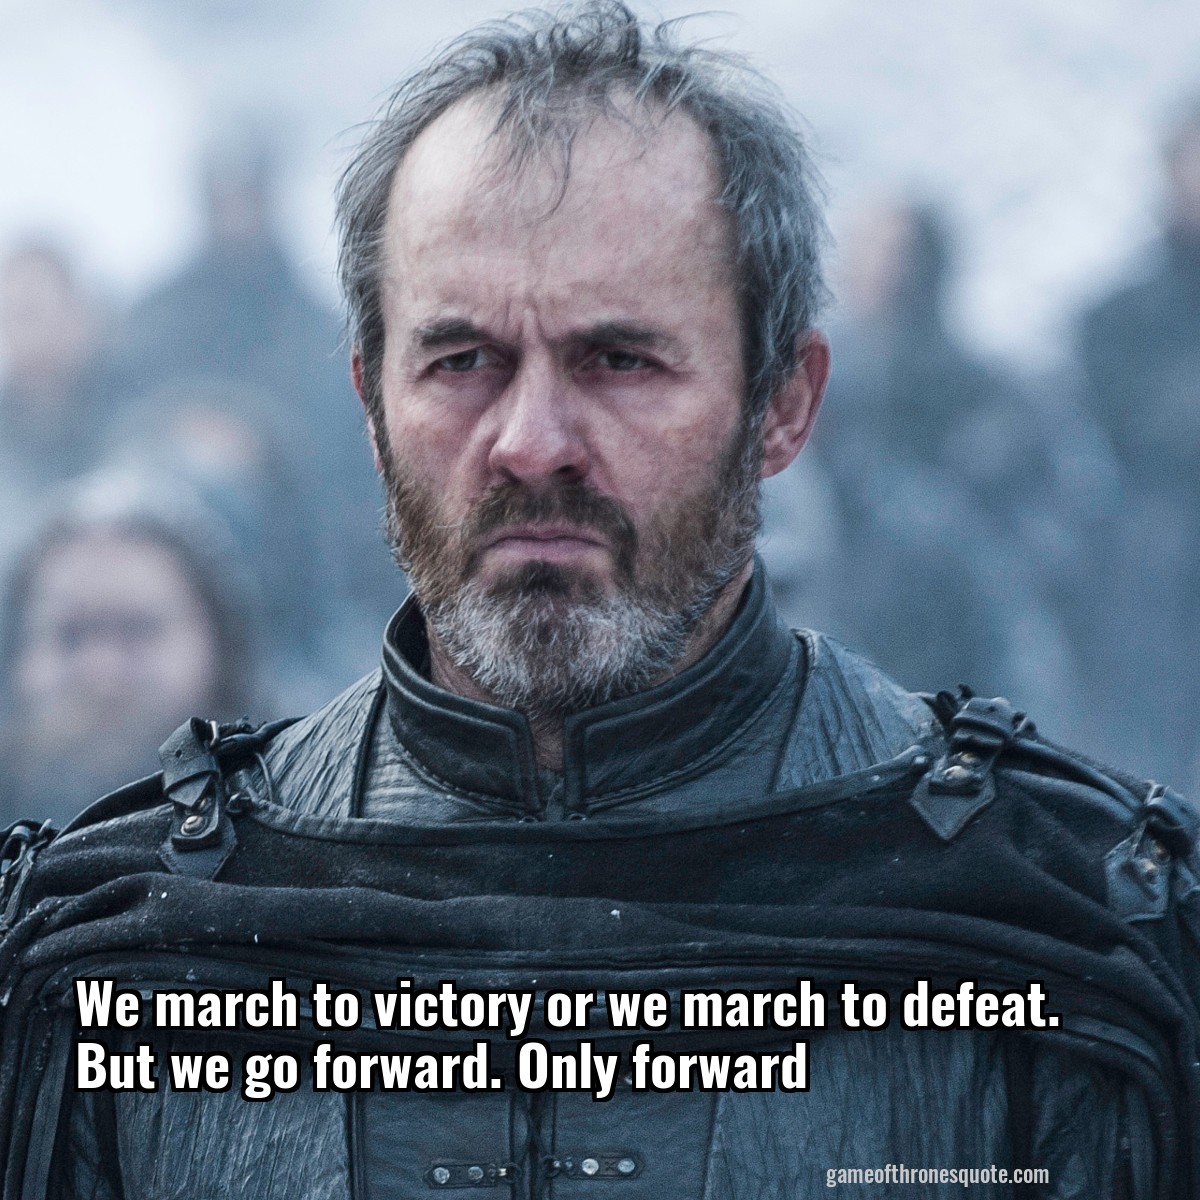 We march to victory or we march to defeat. But we go forward. Only forward